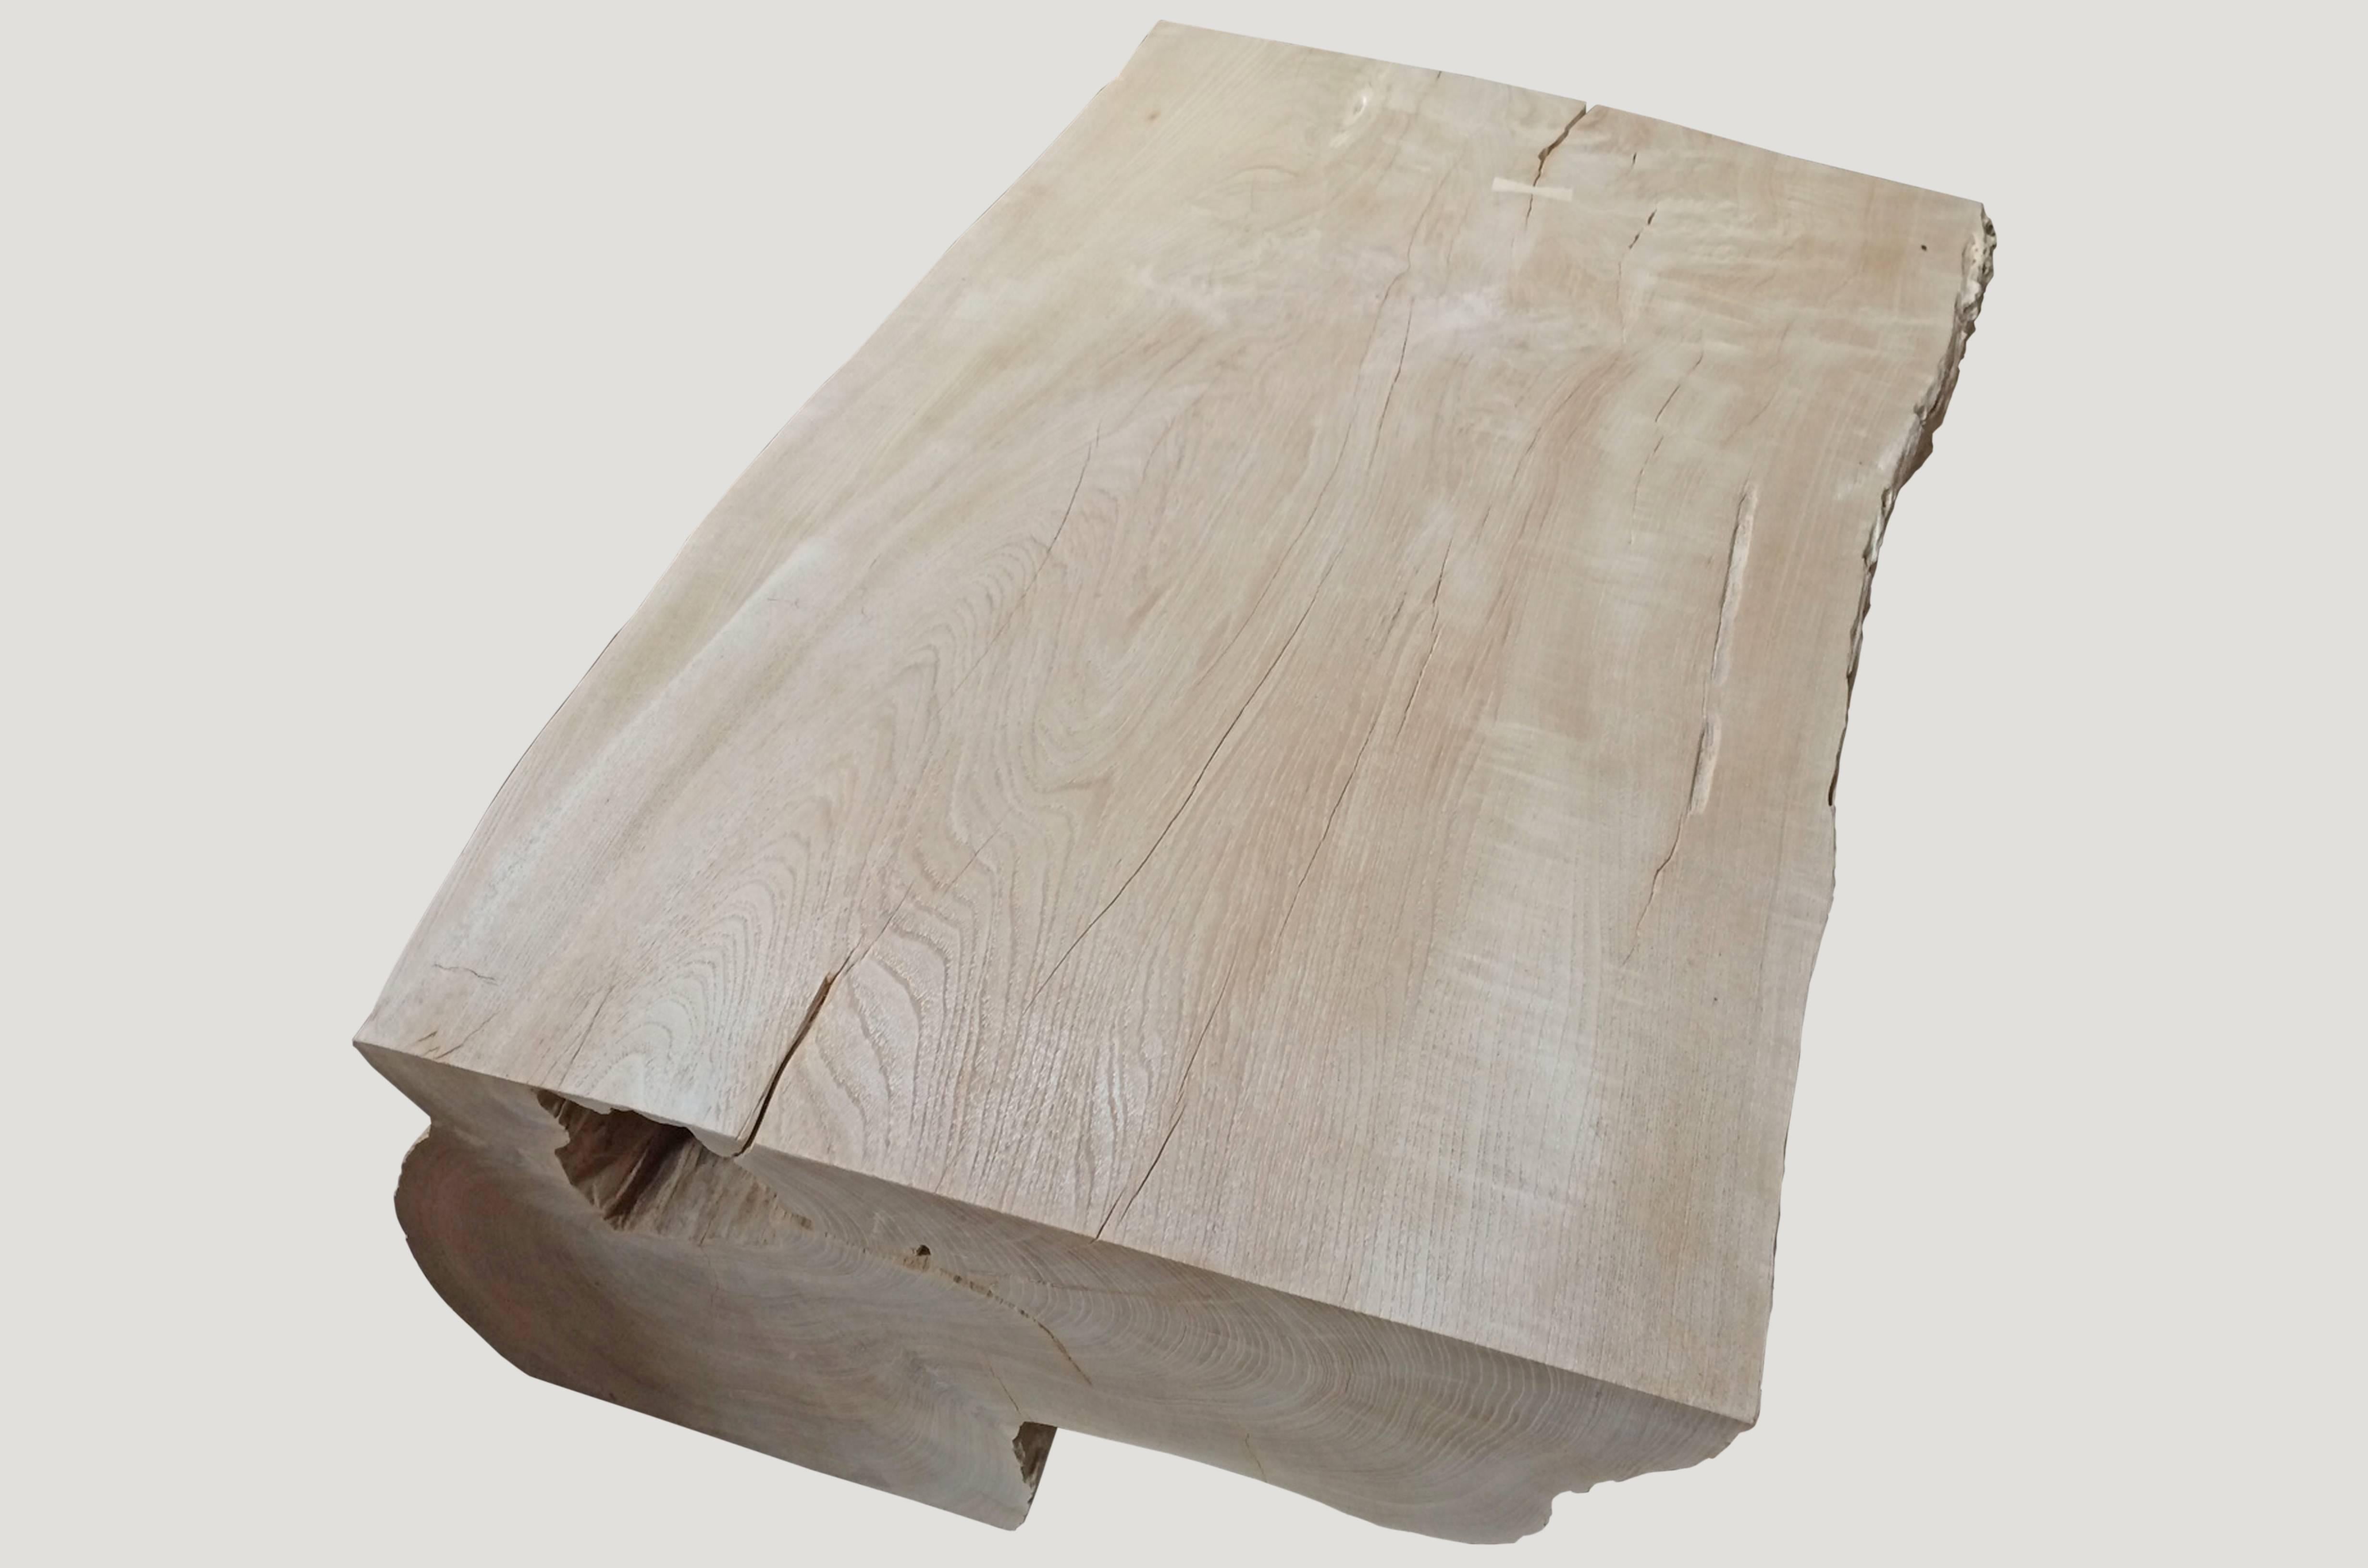 Impressive single slab coffee table made from a hundred year old reclaimed teak root. This stunning teak single slab also features butterfly details. We have added a light shellack on the top section. Organic is the new modern.

The St. Barts